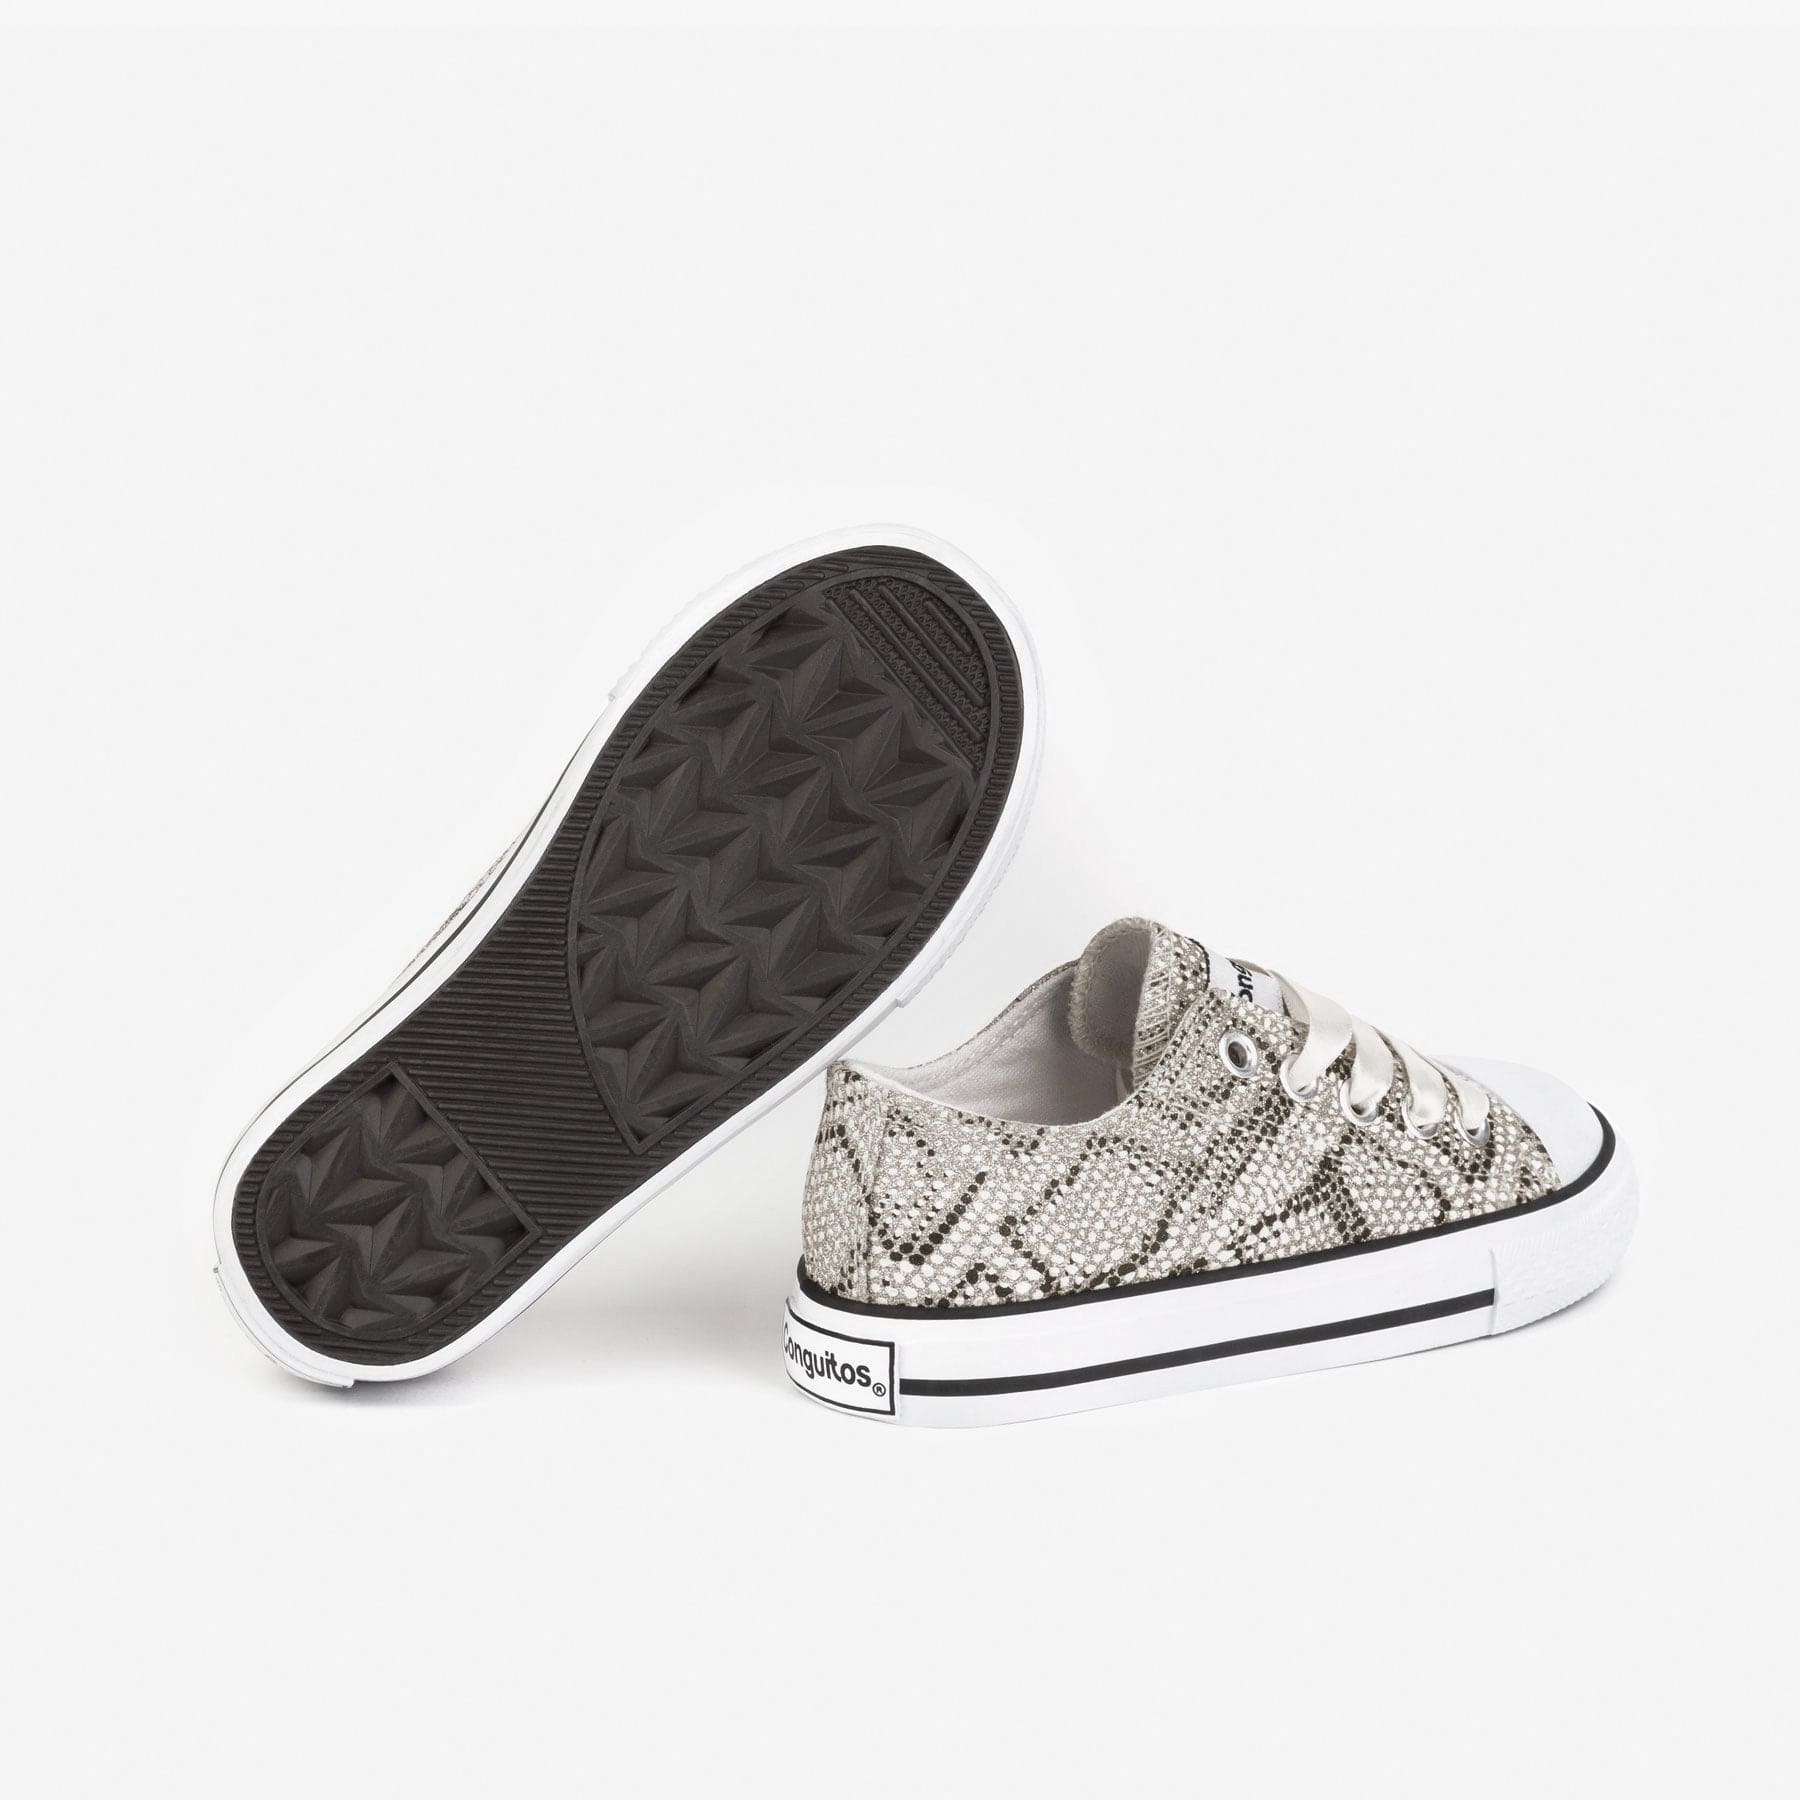 CONGUITOS Shoes Girl's Snake Silver Sneakers